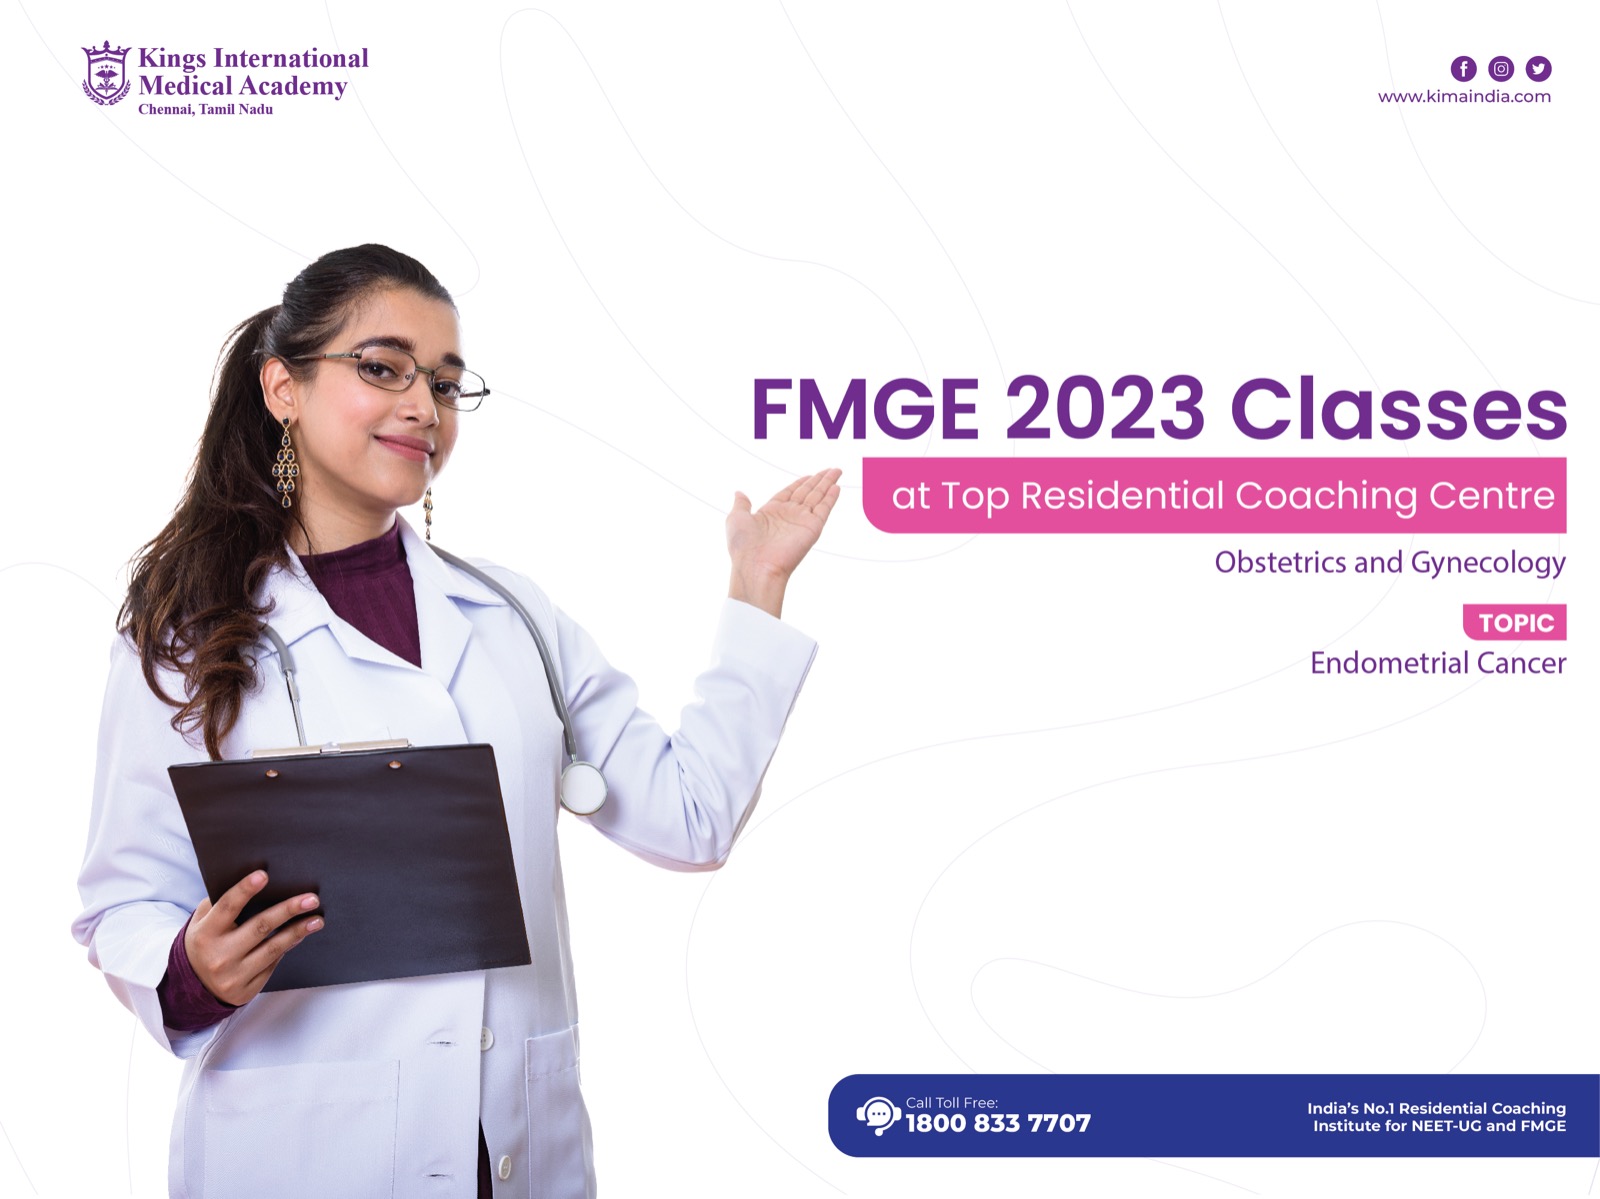 FMGE 2023 Classes at Top Residential Coaching Centre